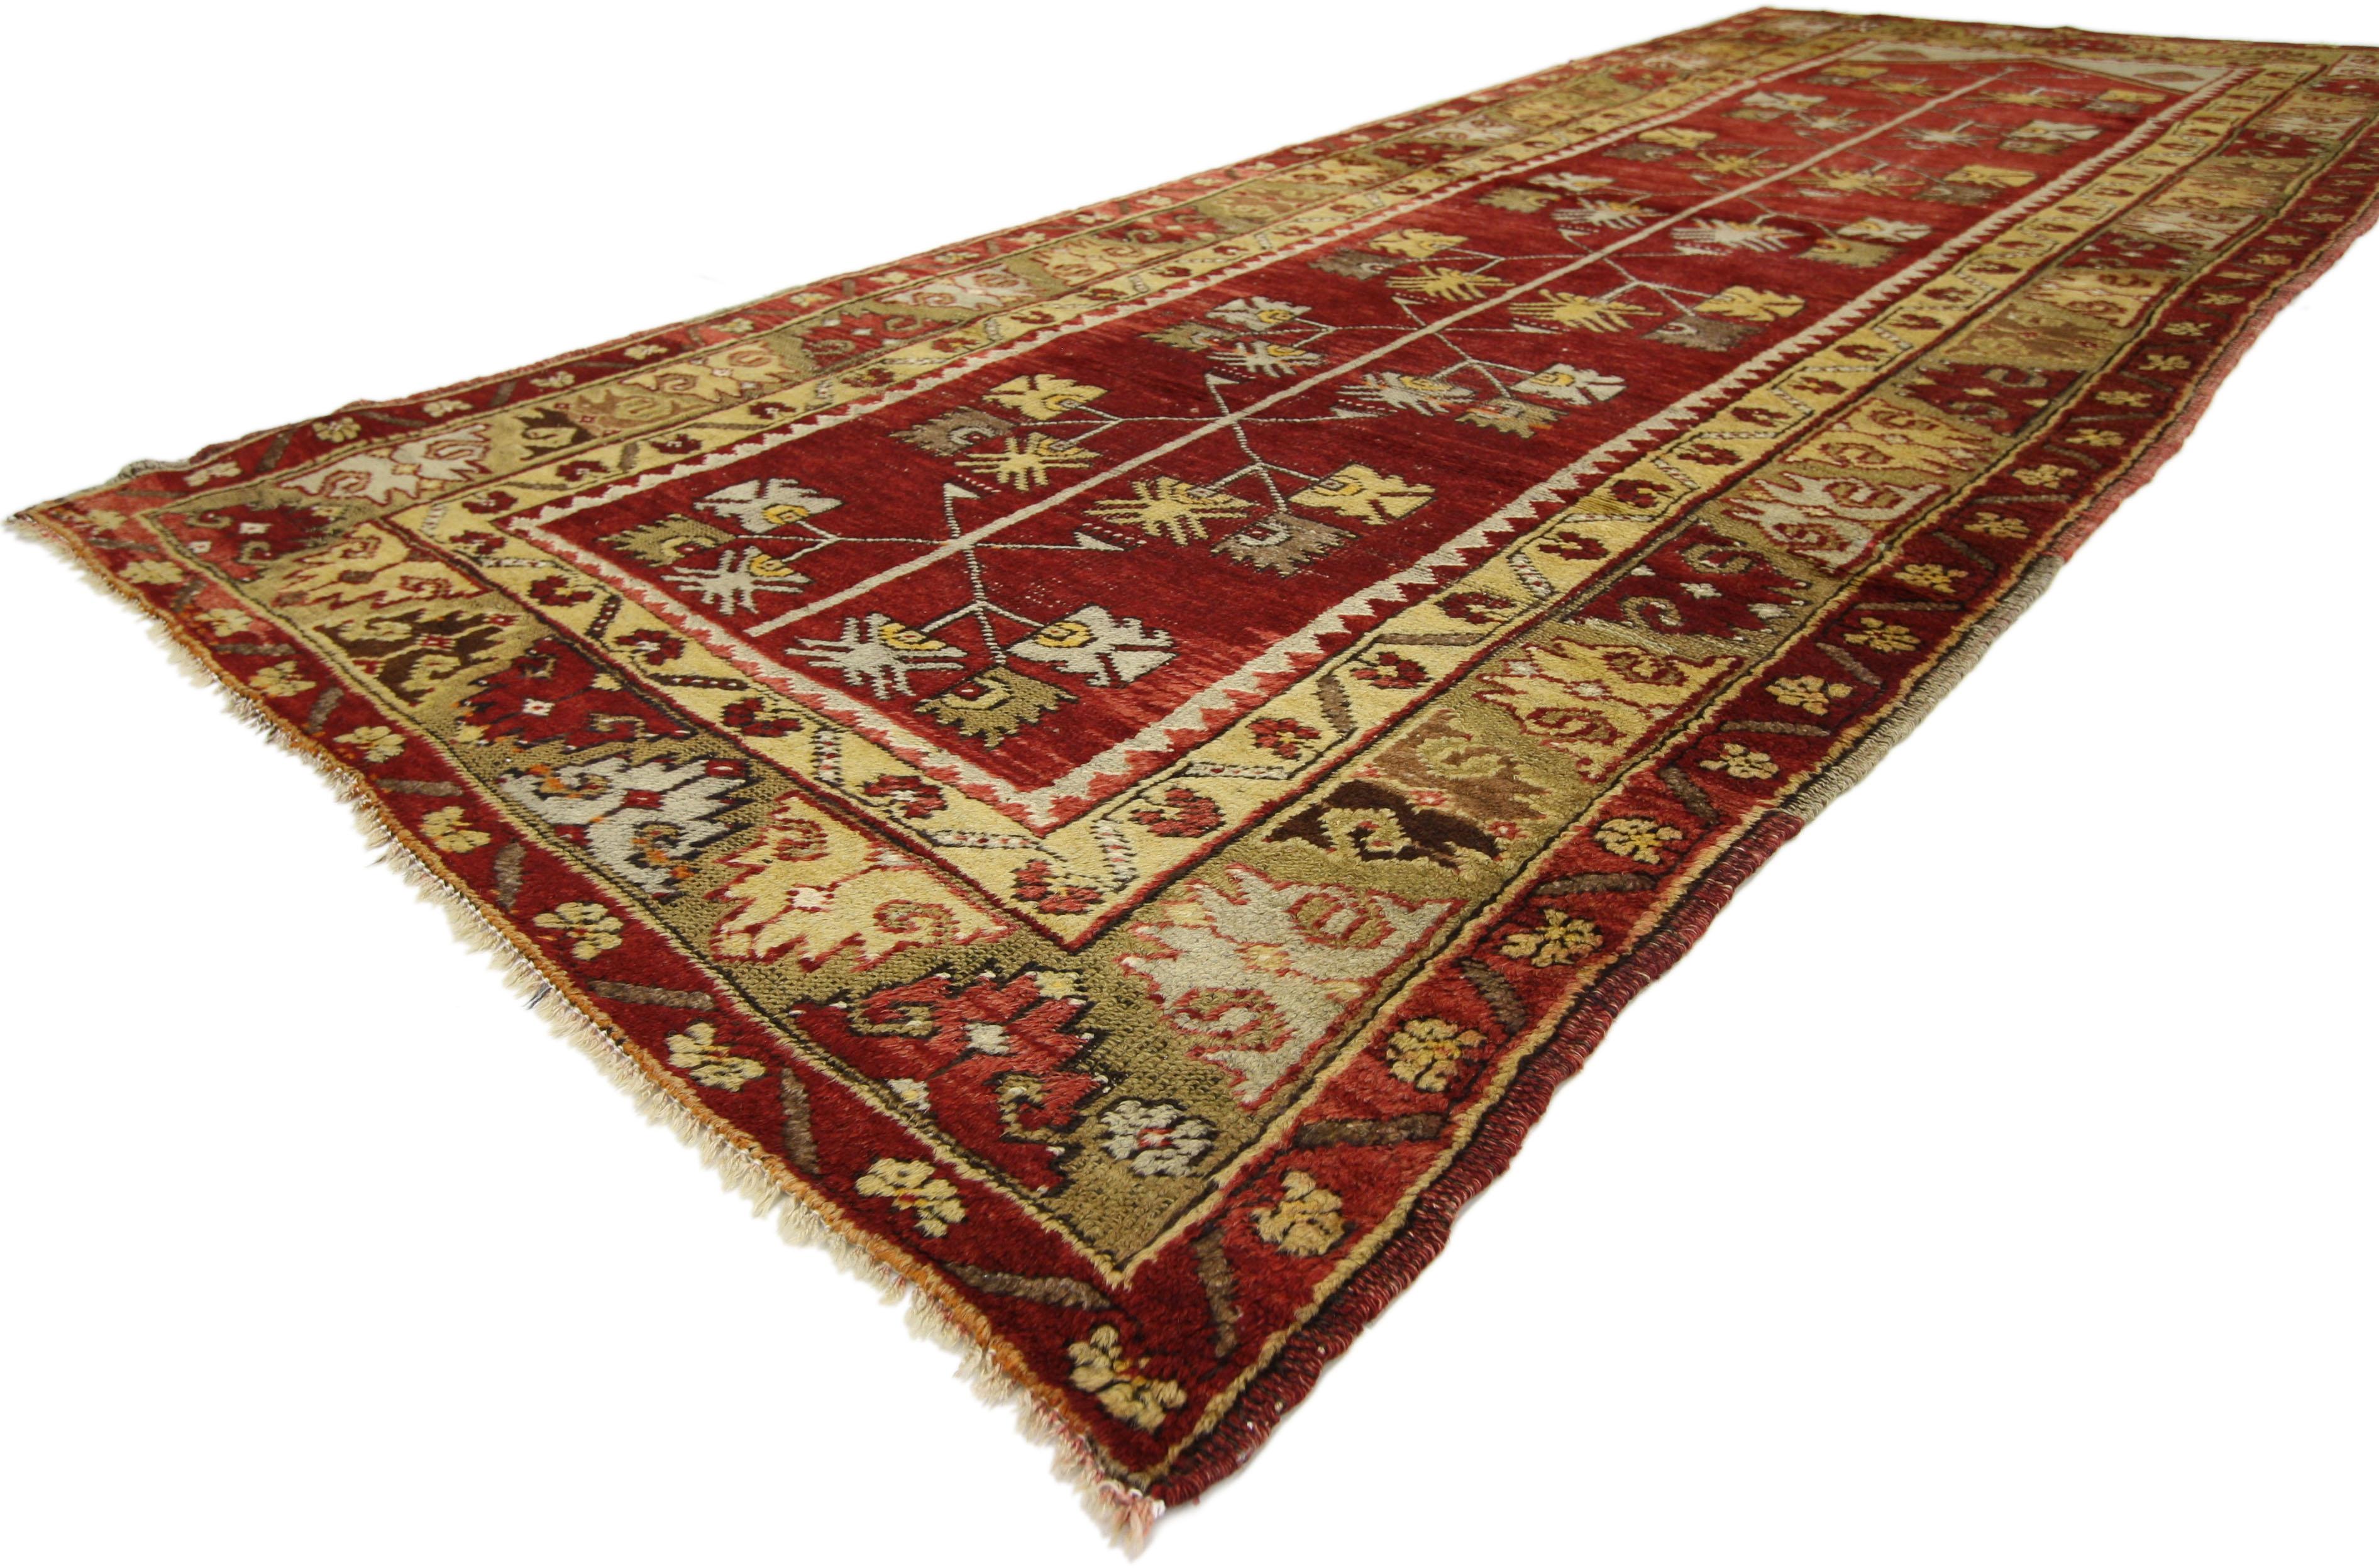 An elaborate Turkish design and rich waves of abrash creates a mesmerizing sense of well-balanced proportions in this vintage Turkish Oushak carpet runner. With its compelling geometric motifs and stylized mihrab niche, this Oushak carpet runner